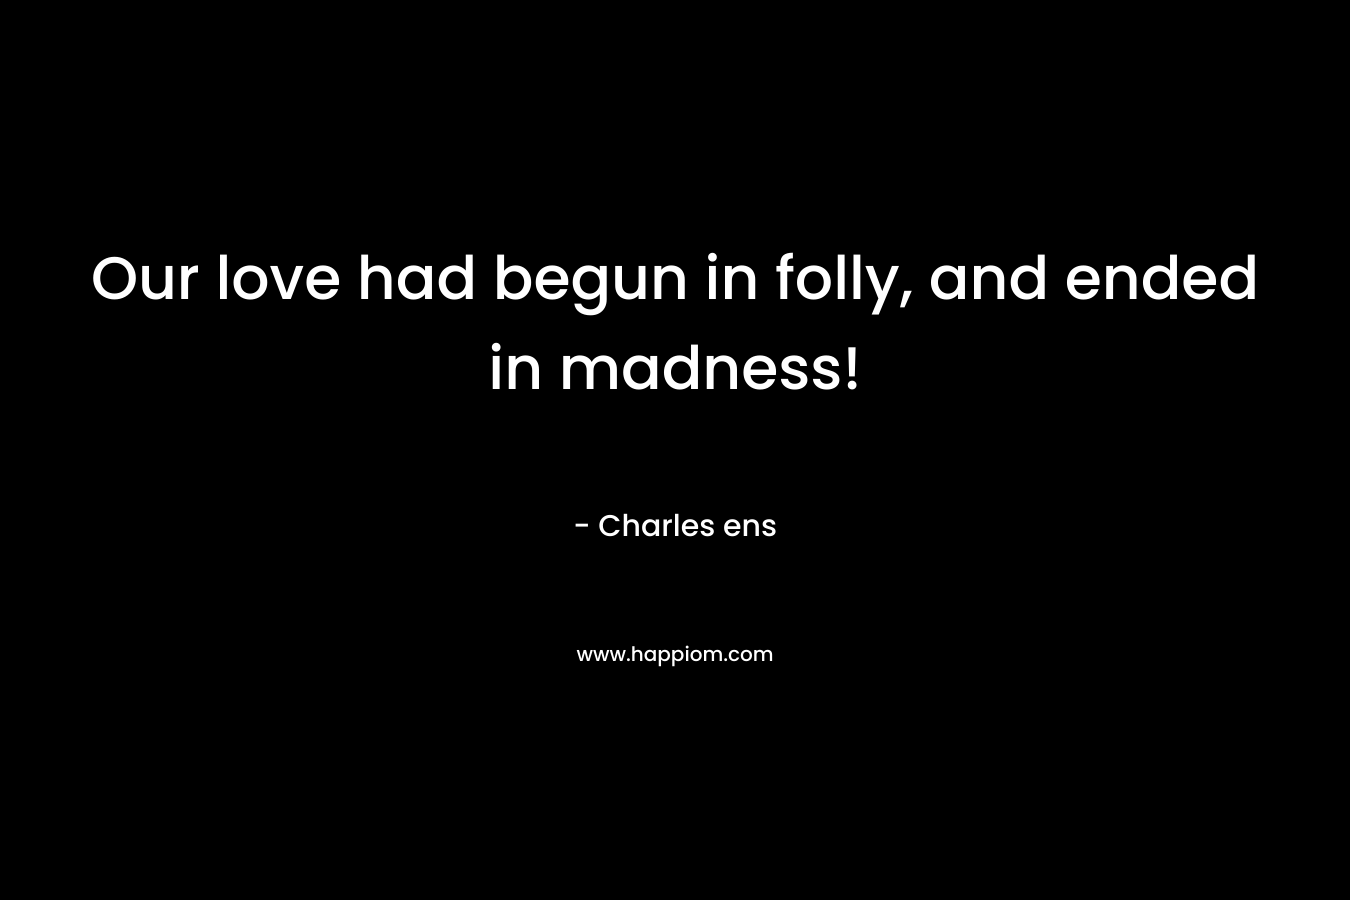 Our love had begun in folly, and ended in madness! – Charles ens